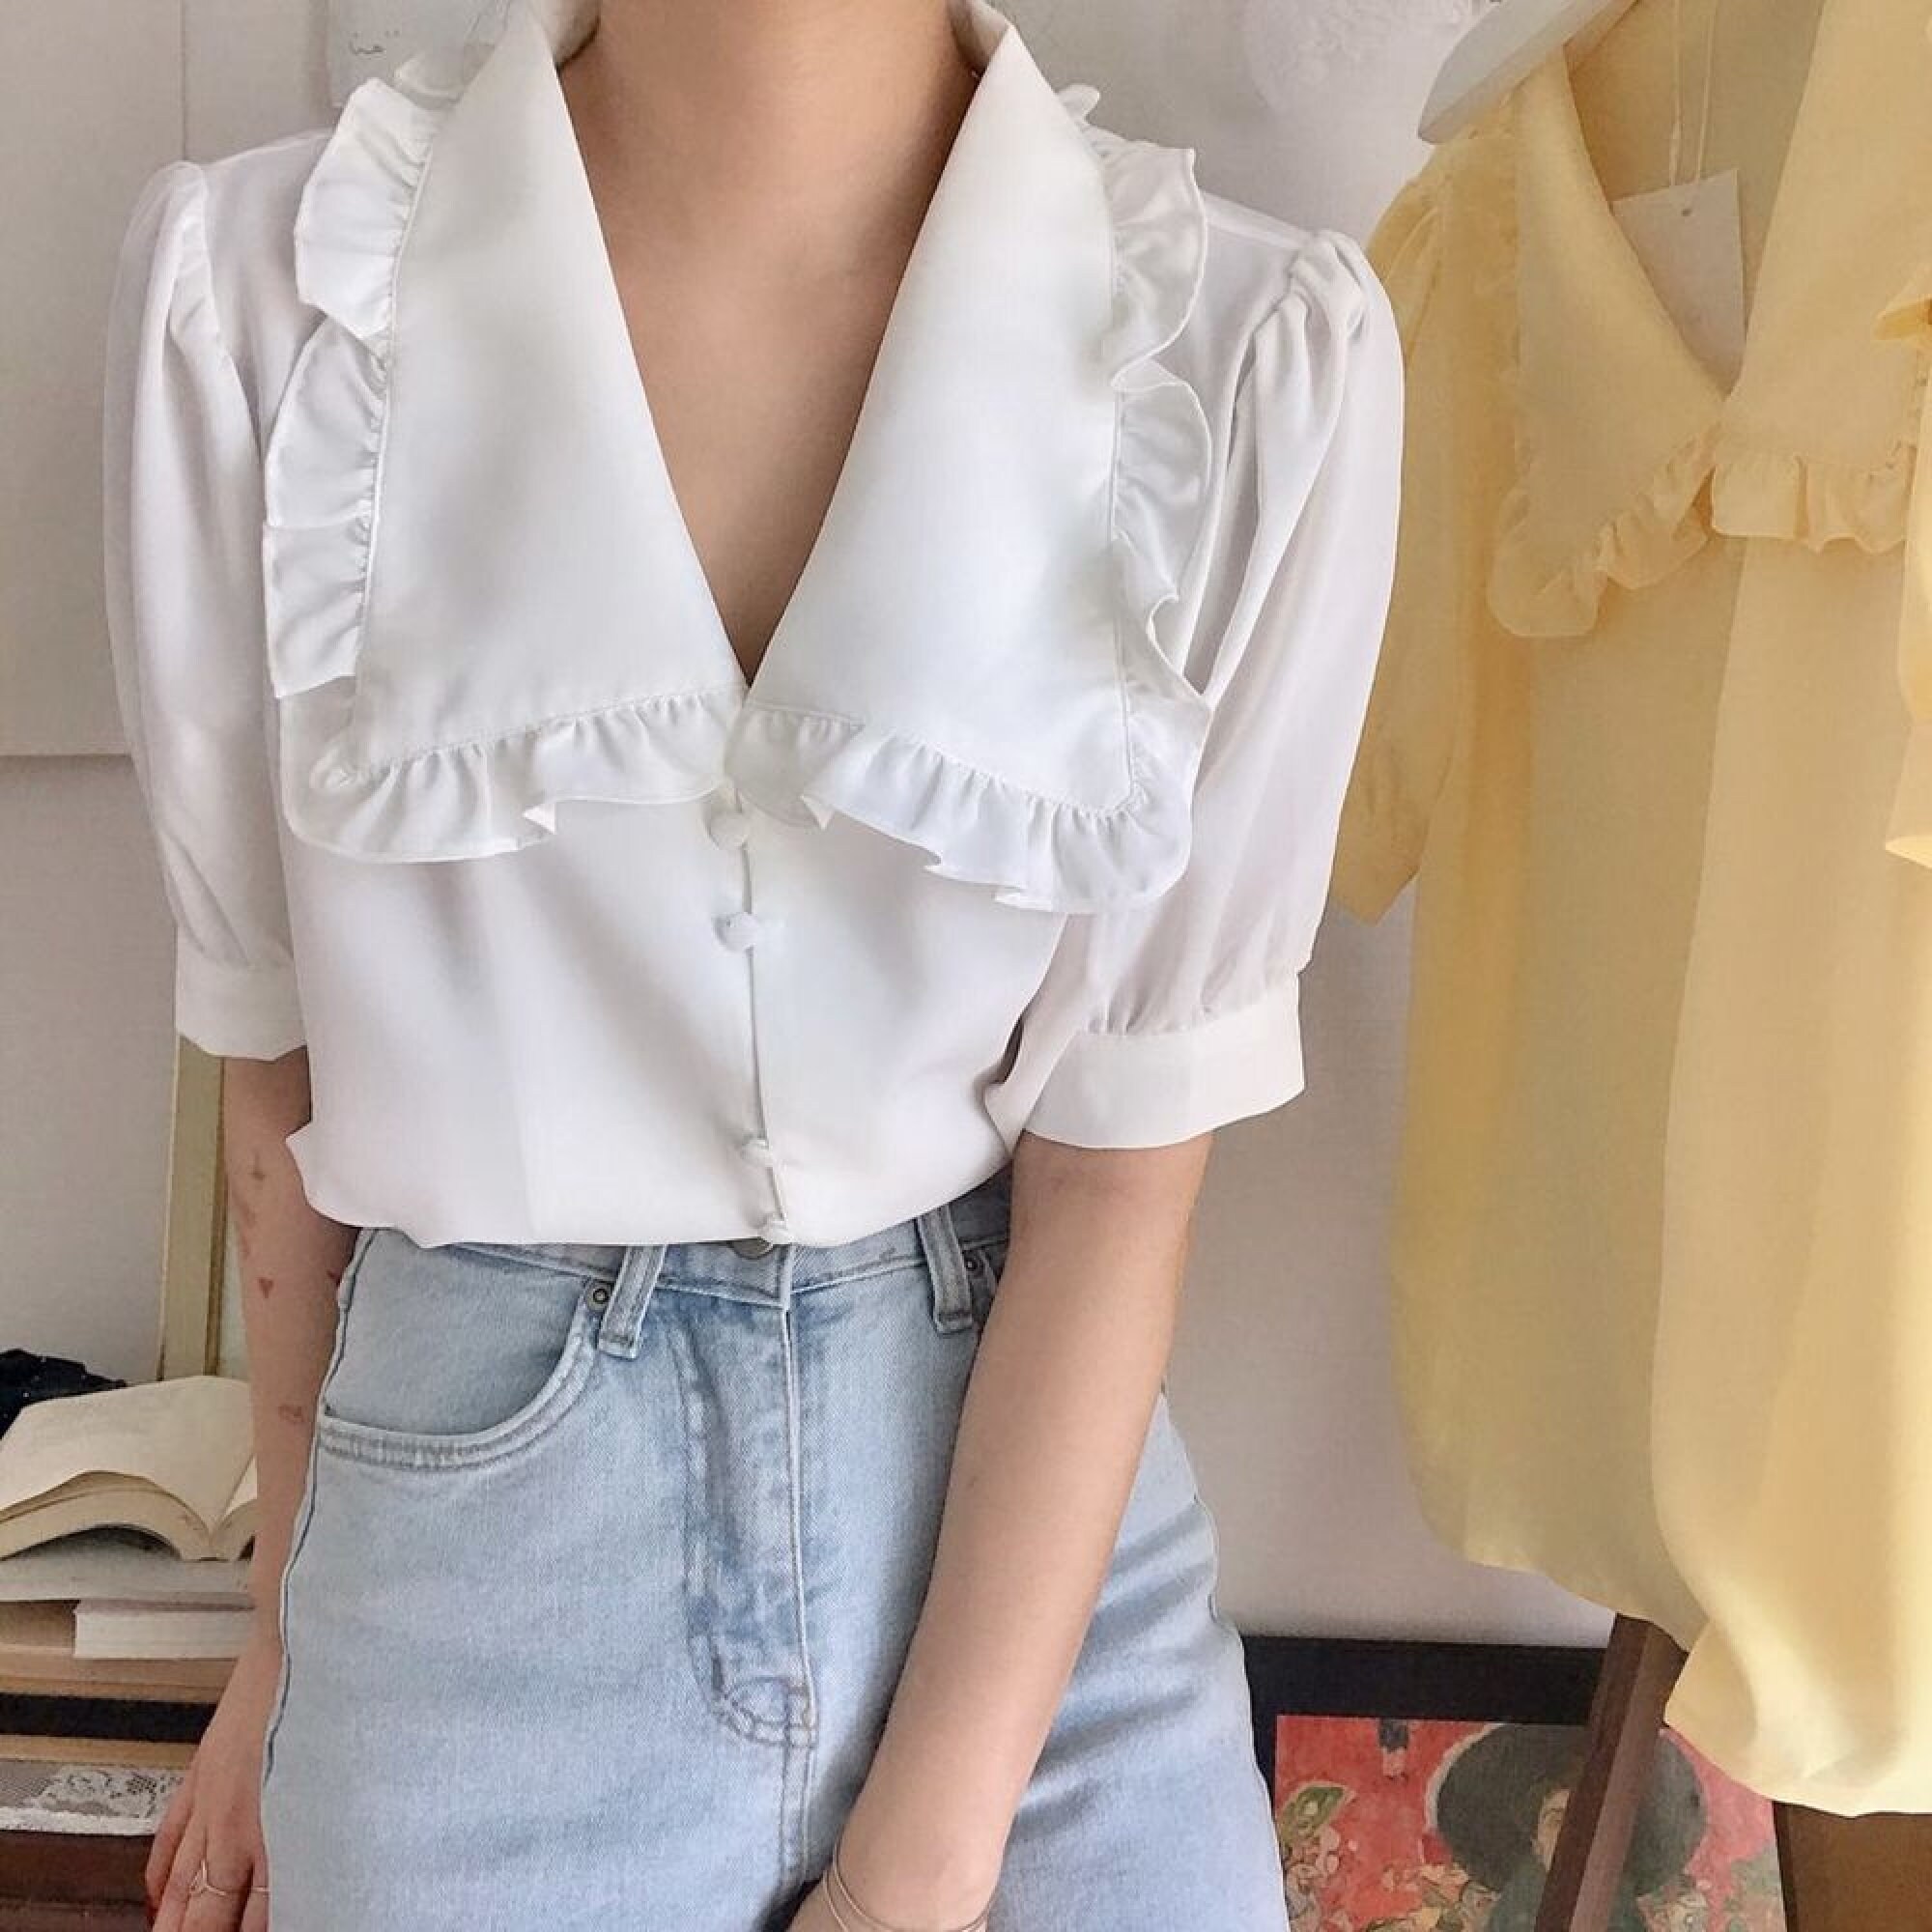 White Short Sleeve Blouse with Peter Pan Collar Ruffled Shirt | Etsy